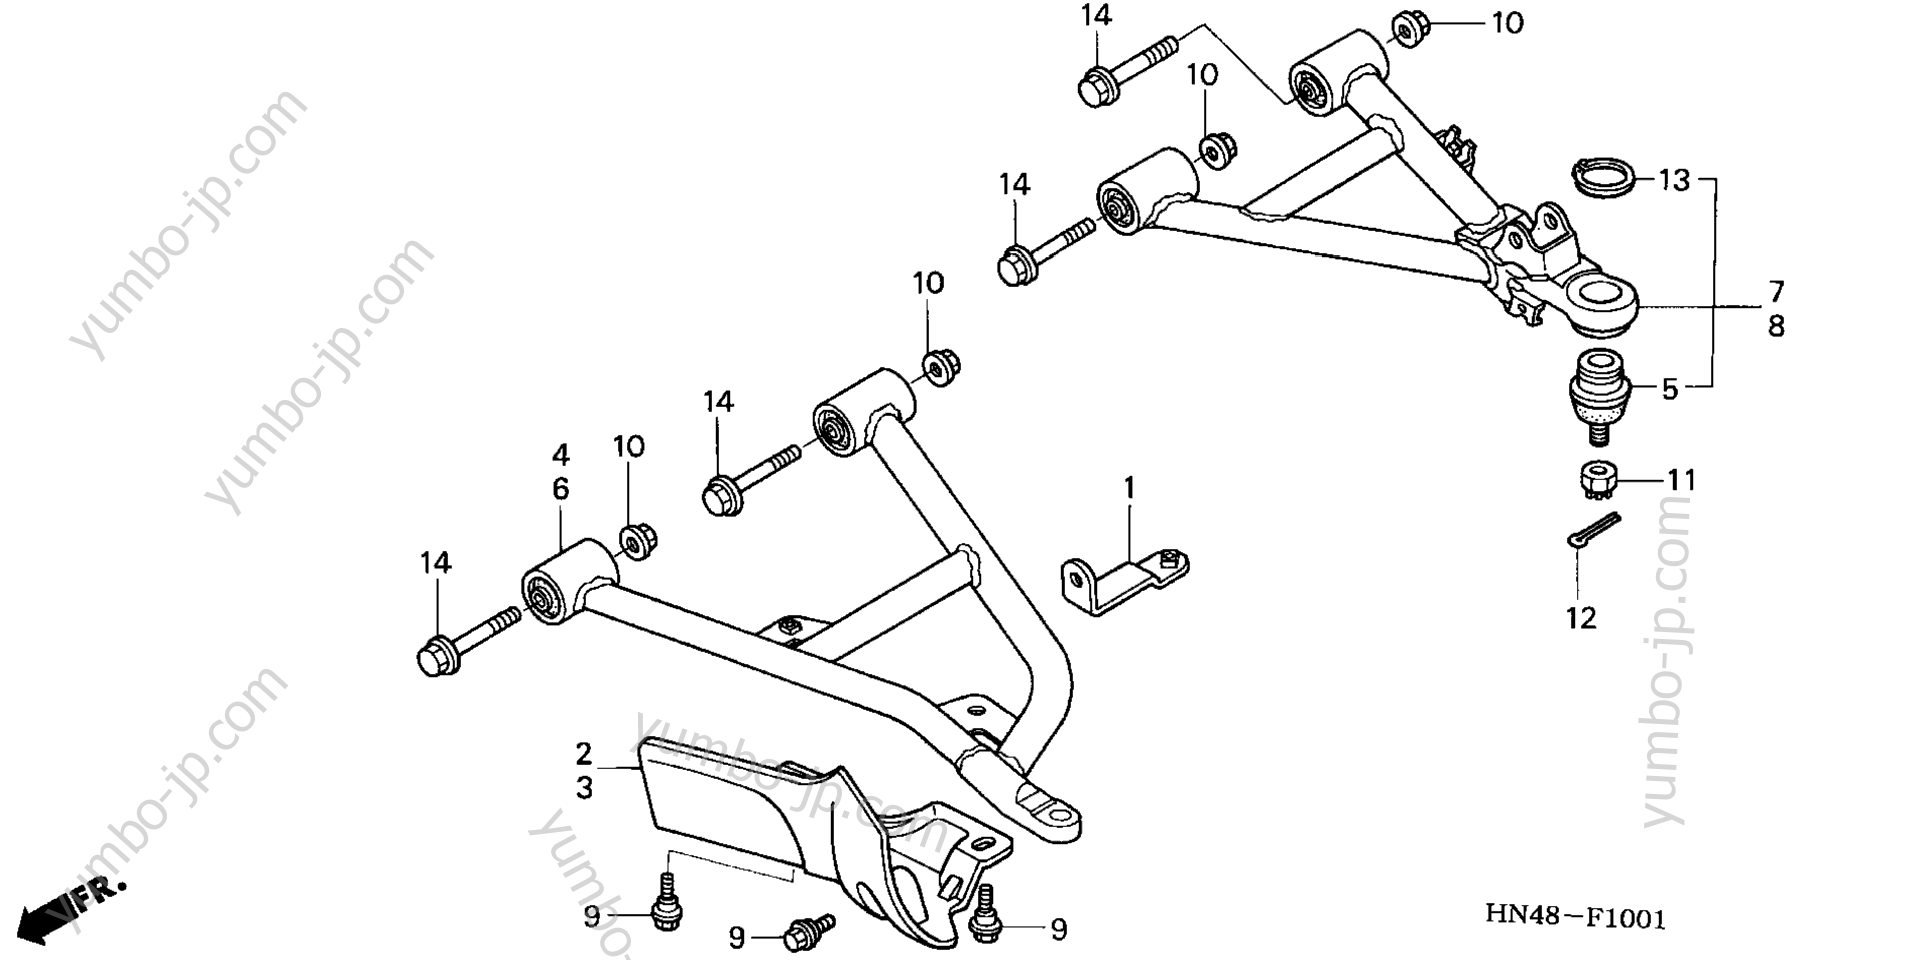 FRONT ARM (4WD) for ATVs HONDA TRX350FM 2A 2004 year